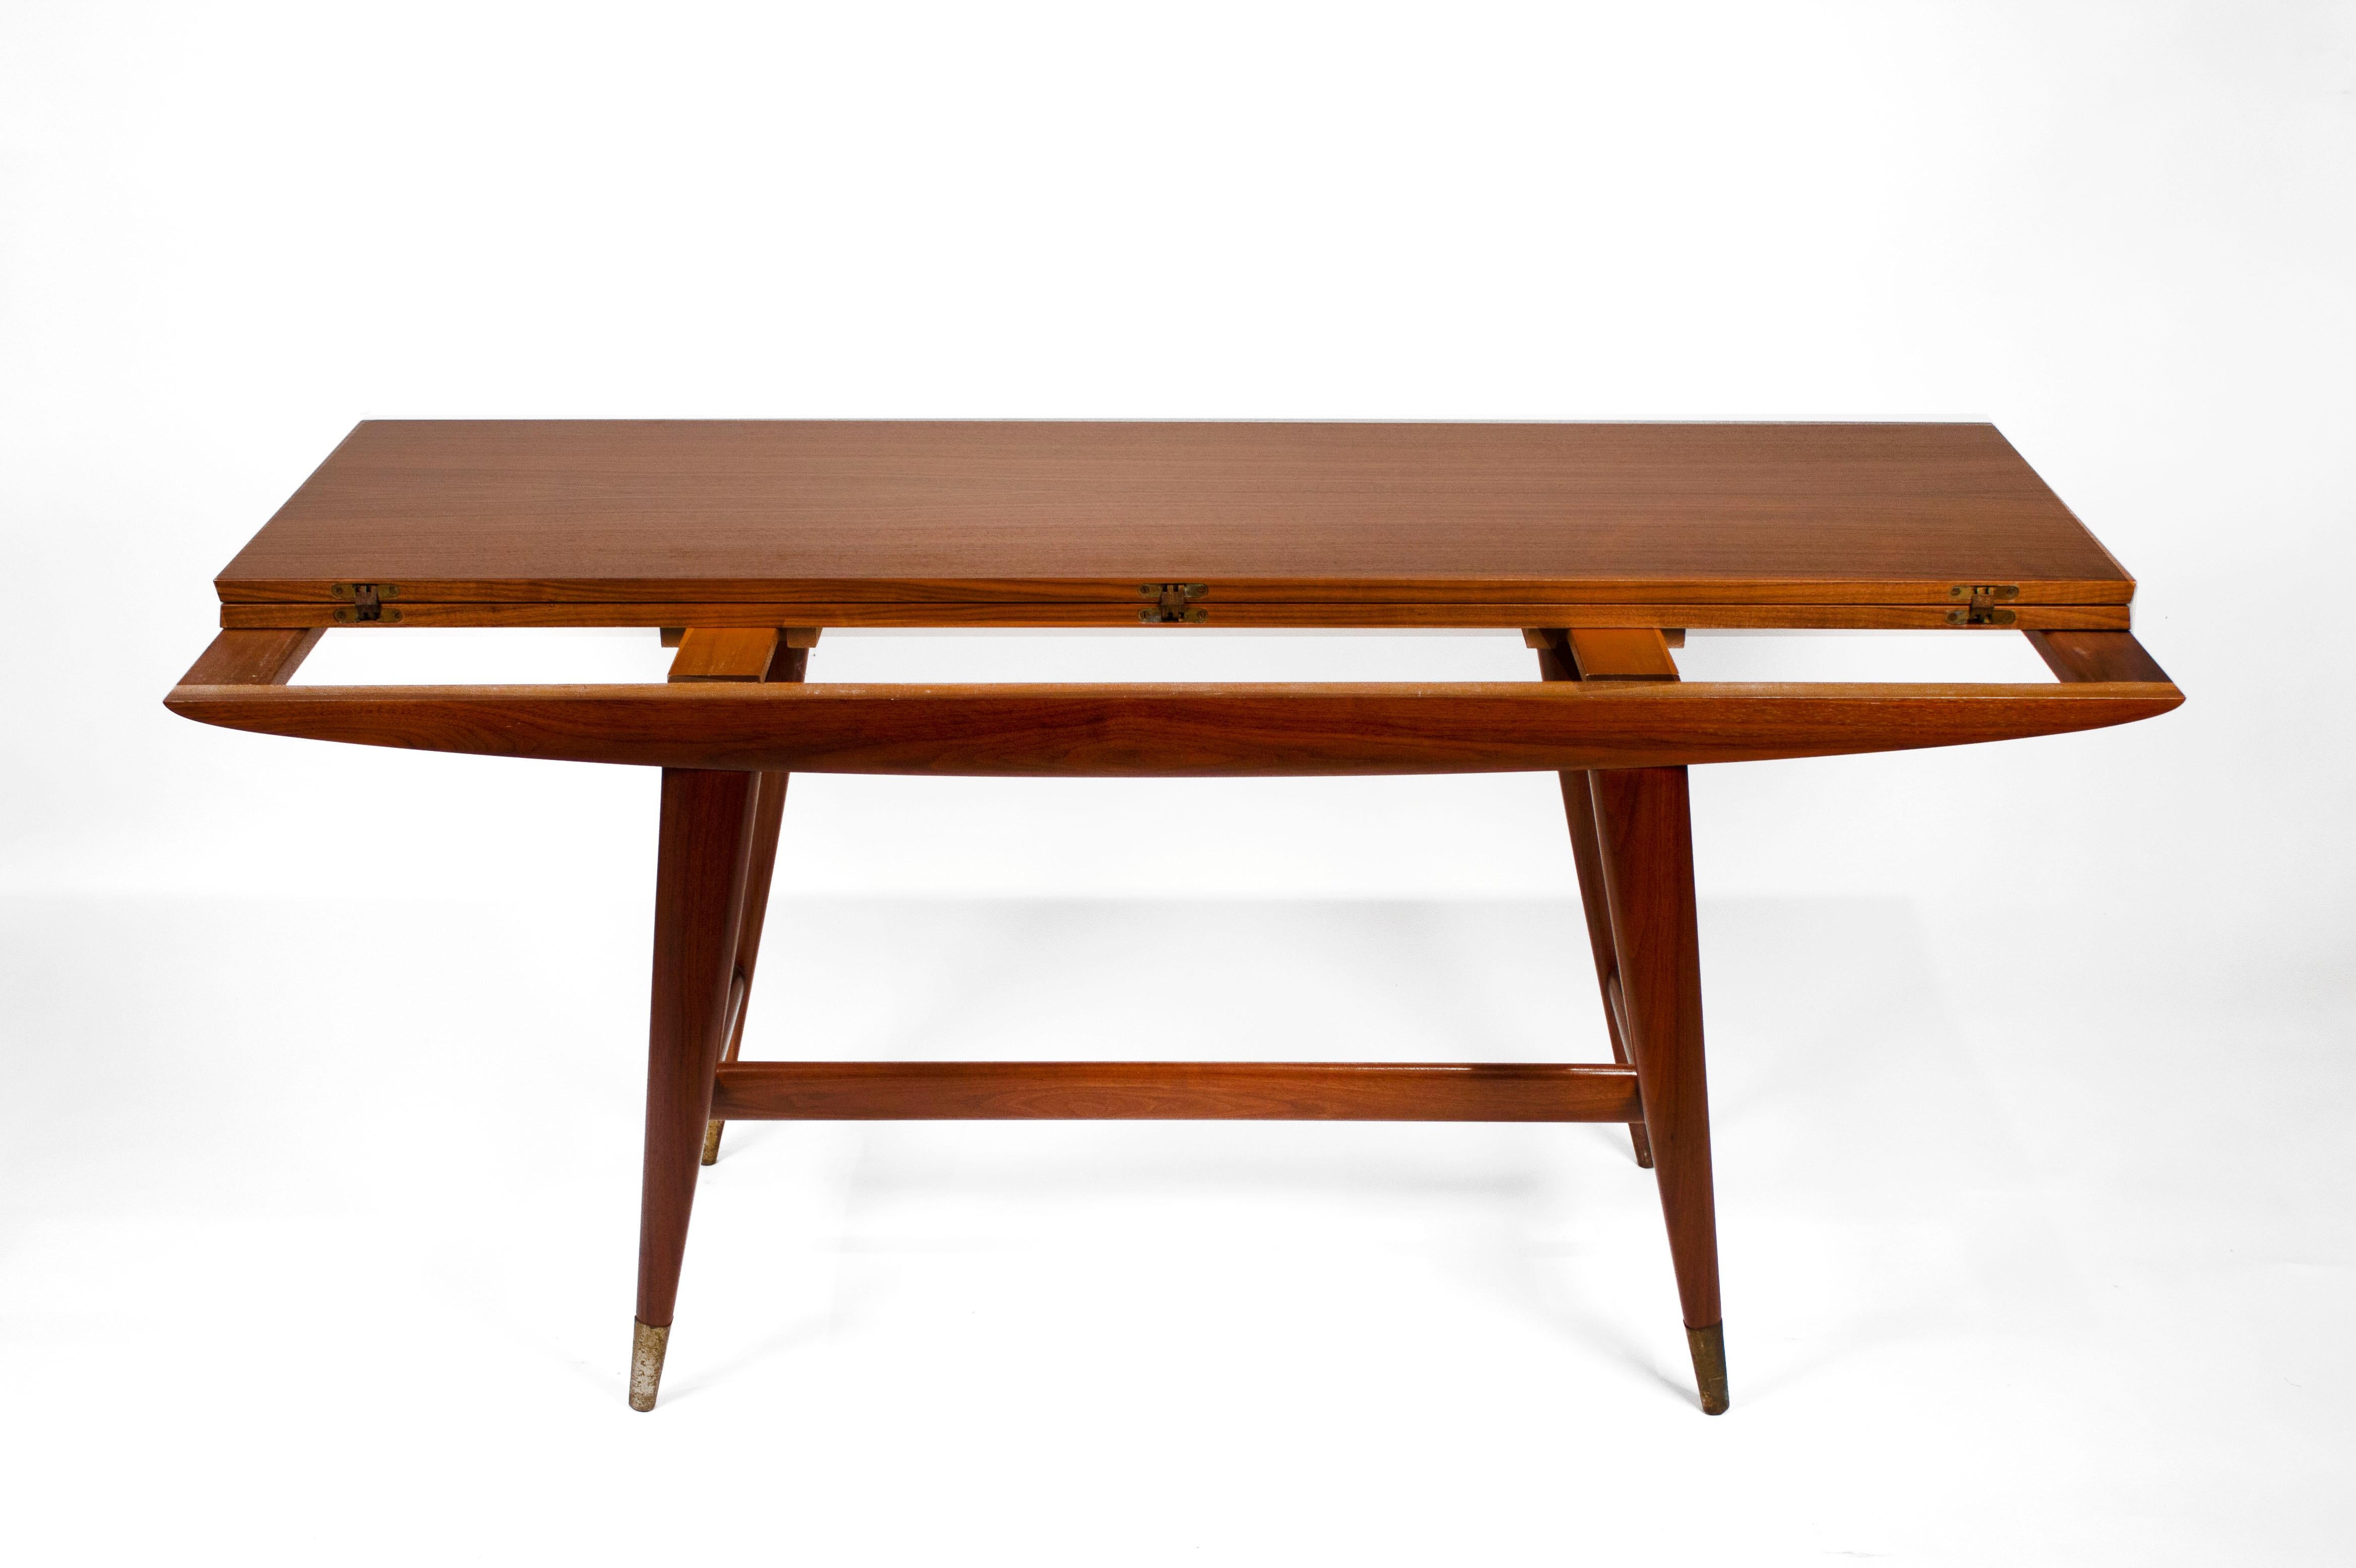 Italian Gio Ponti Convertible Console / Dining Table for M. Singer & Sons in Walnut 1950